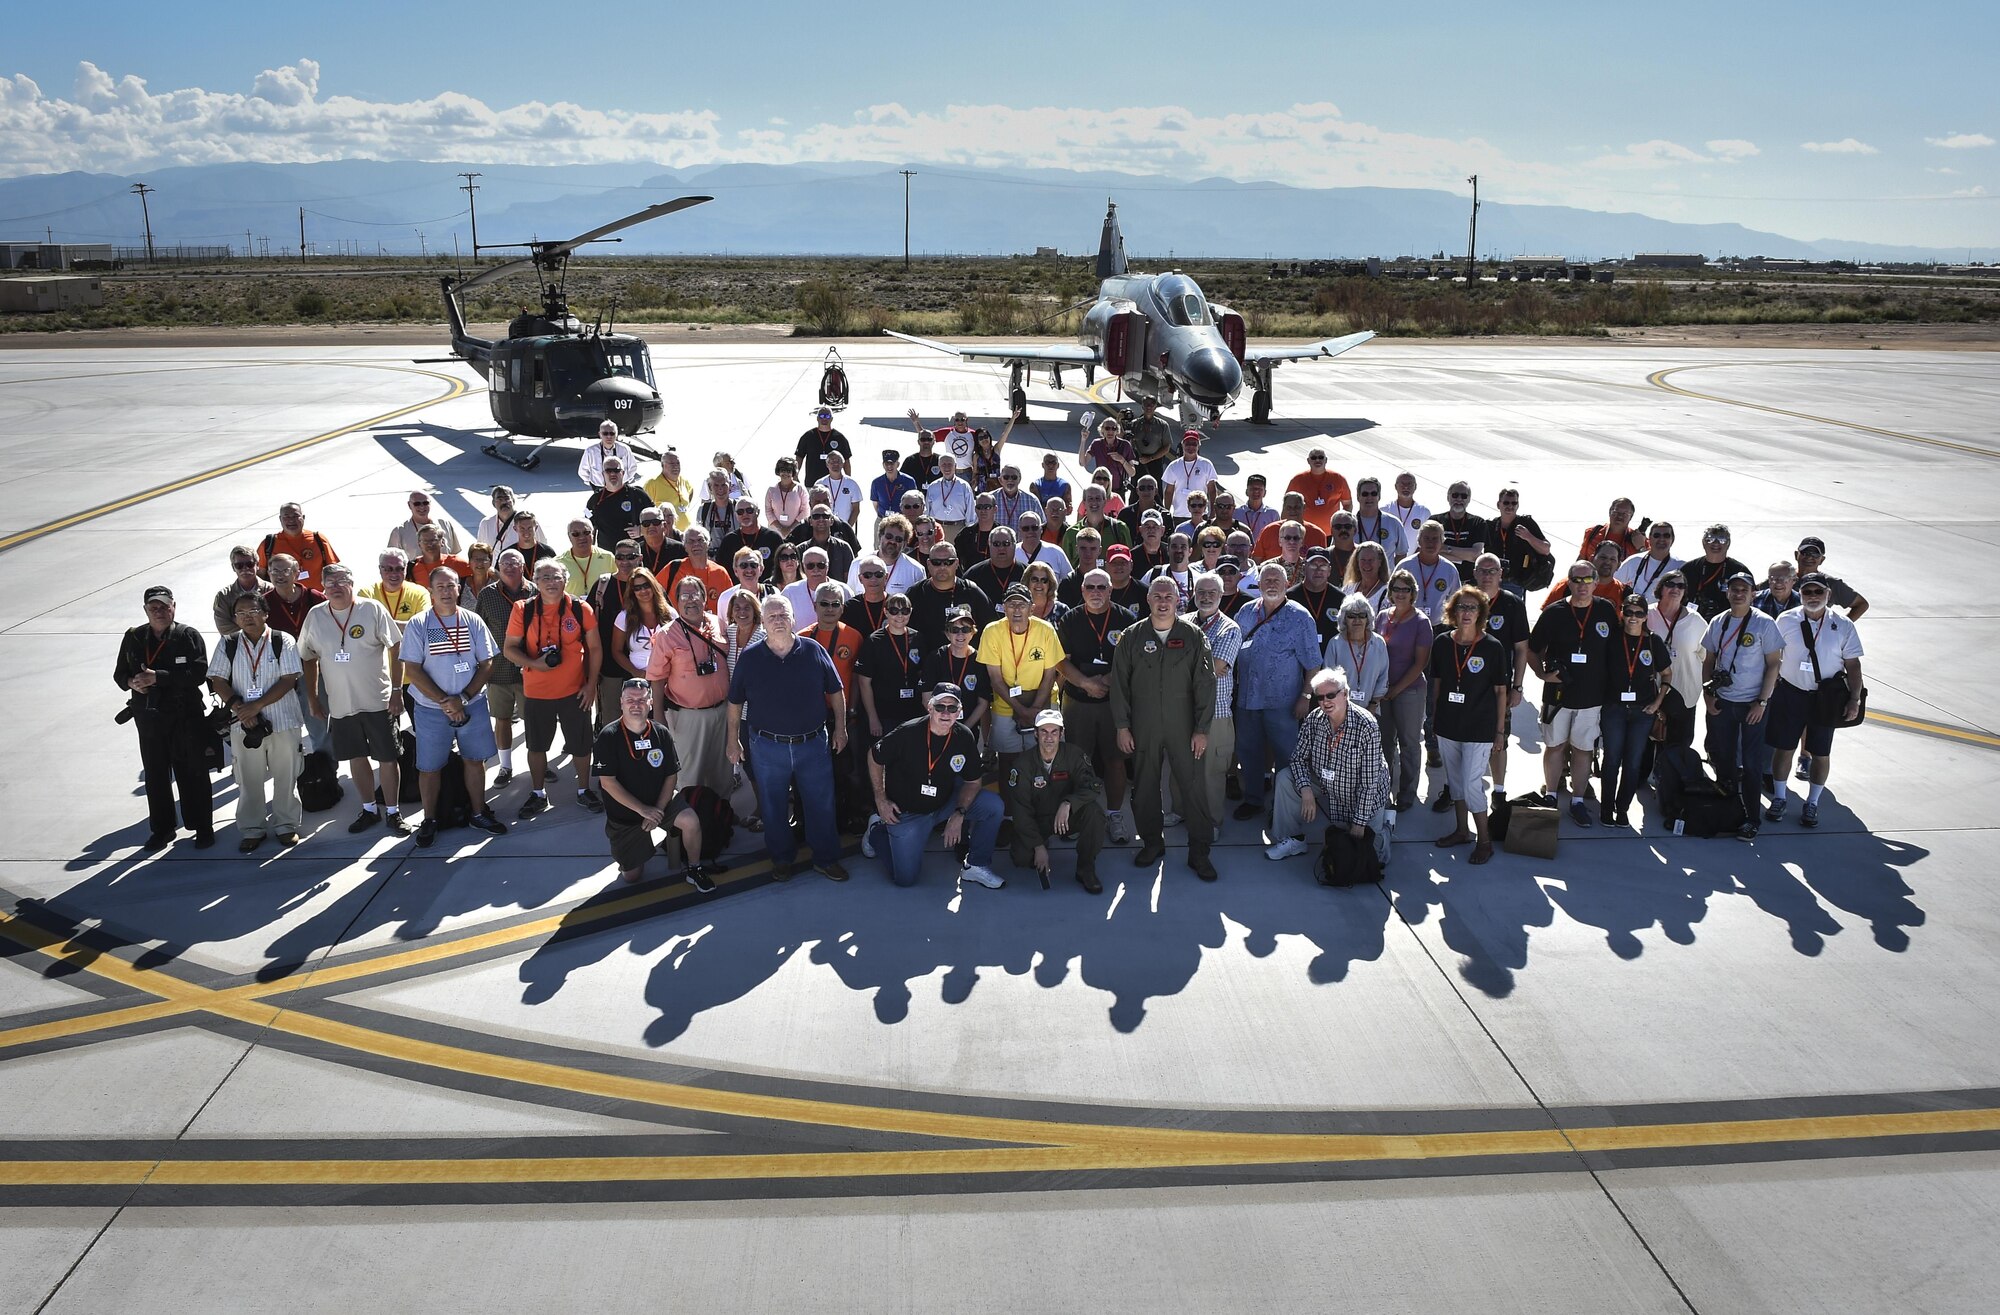 All 160 Phantom Society participants pose for a picture Sept. 13, 2016, at Holloman AFB. The Phantom II society is an international non-profit dedicated to the preservation of the history of the McDonnell Douglas F-4 Phantom II fighter. The tour enabled aircraft enthusiasts, including veterans and non-veterans with aviation backgrounds, to explore various base locations. The tour included an F-16 Fighting Falcon static and briefing, travel to Holloman’s High Speed Test Track, the opportunity to view QF-4s and F-16s in flight, and a visit to Heritage Park to view statics displays of various aircraft flown at Holloman AFB. (U.S. Air Force Photo by SSgt Stacy Jonsgaard)